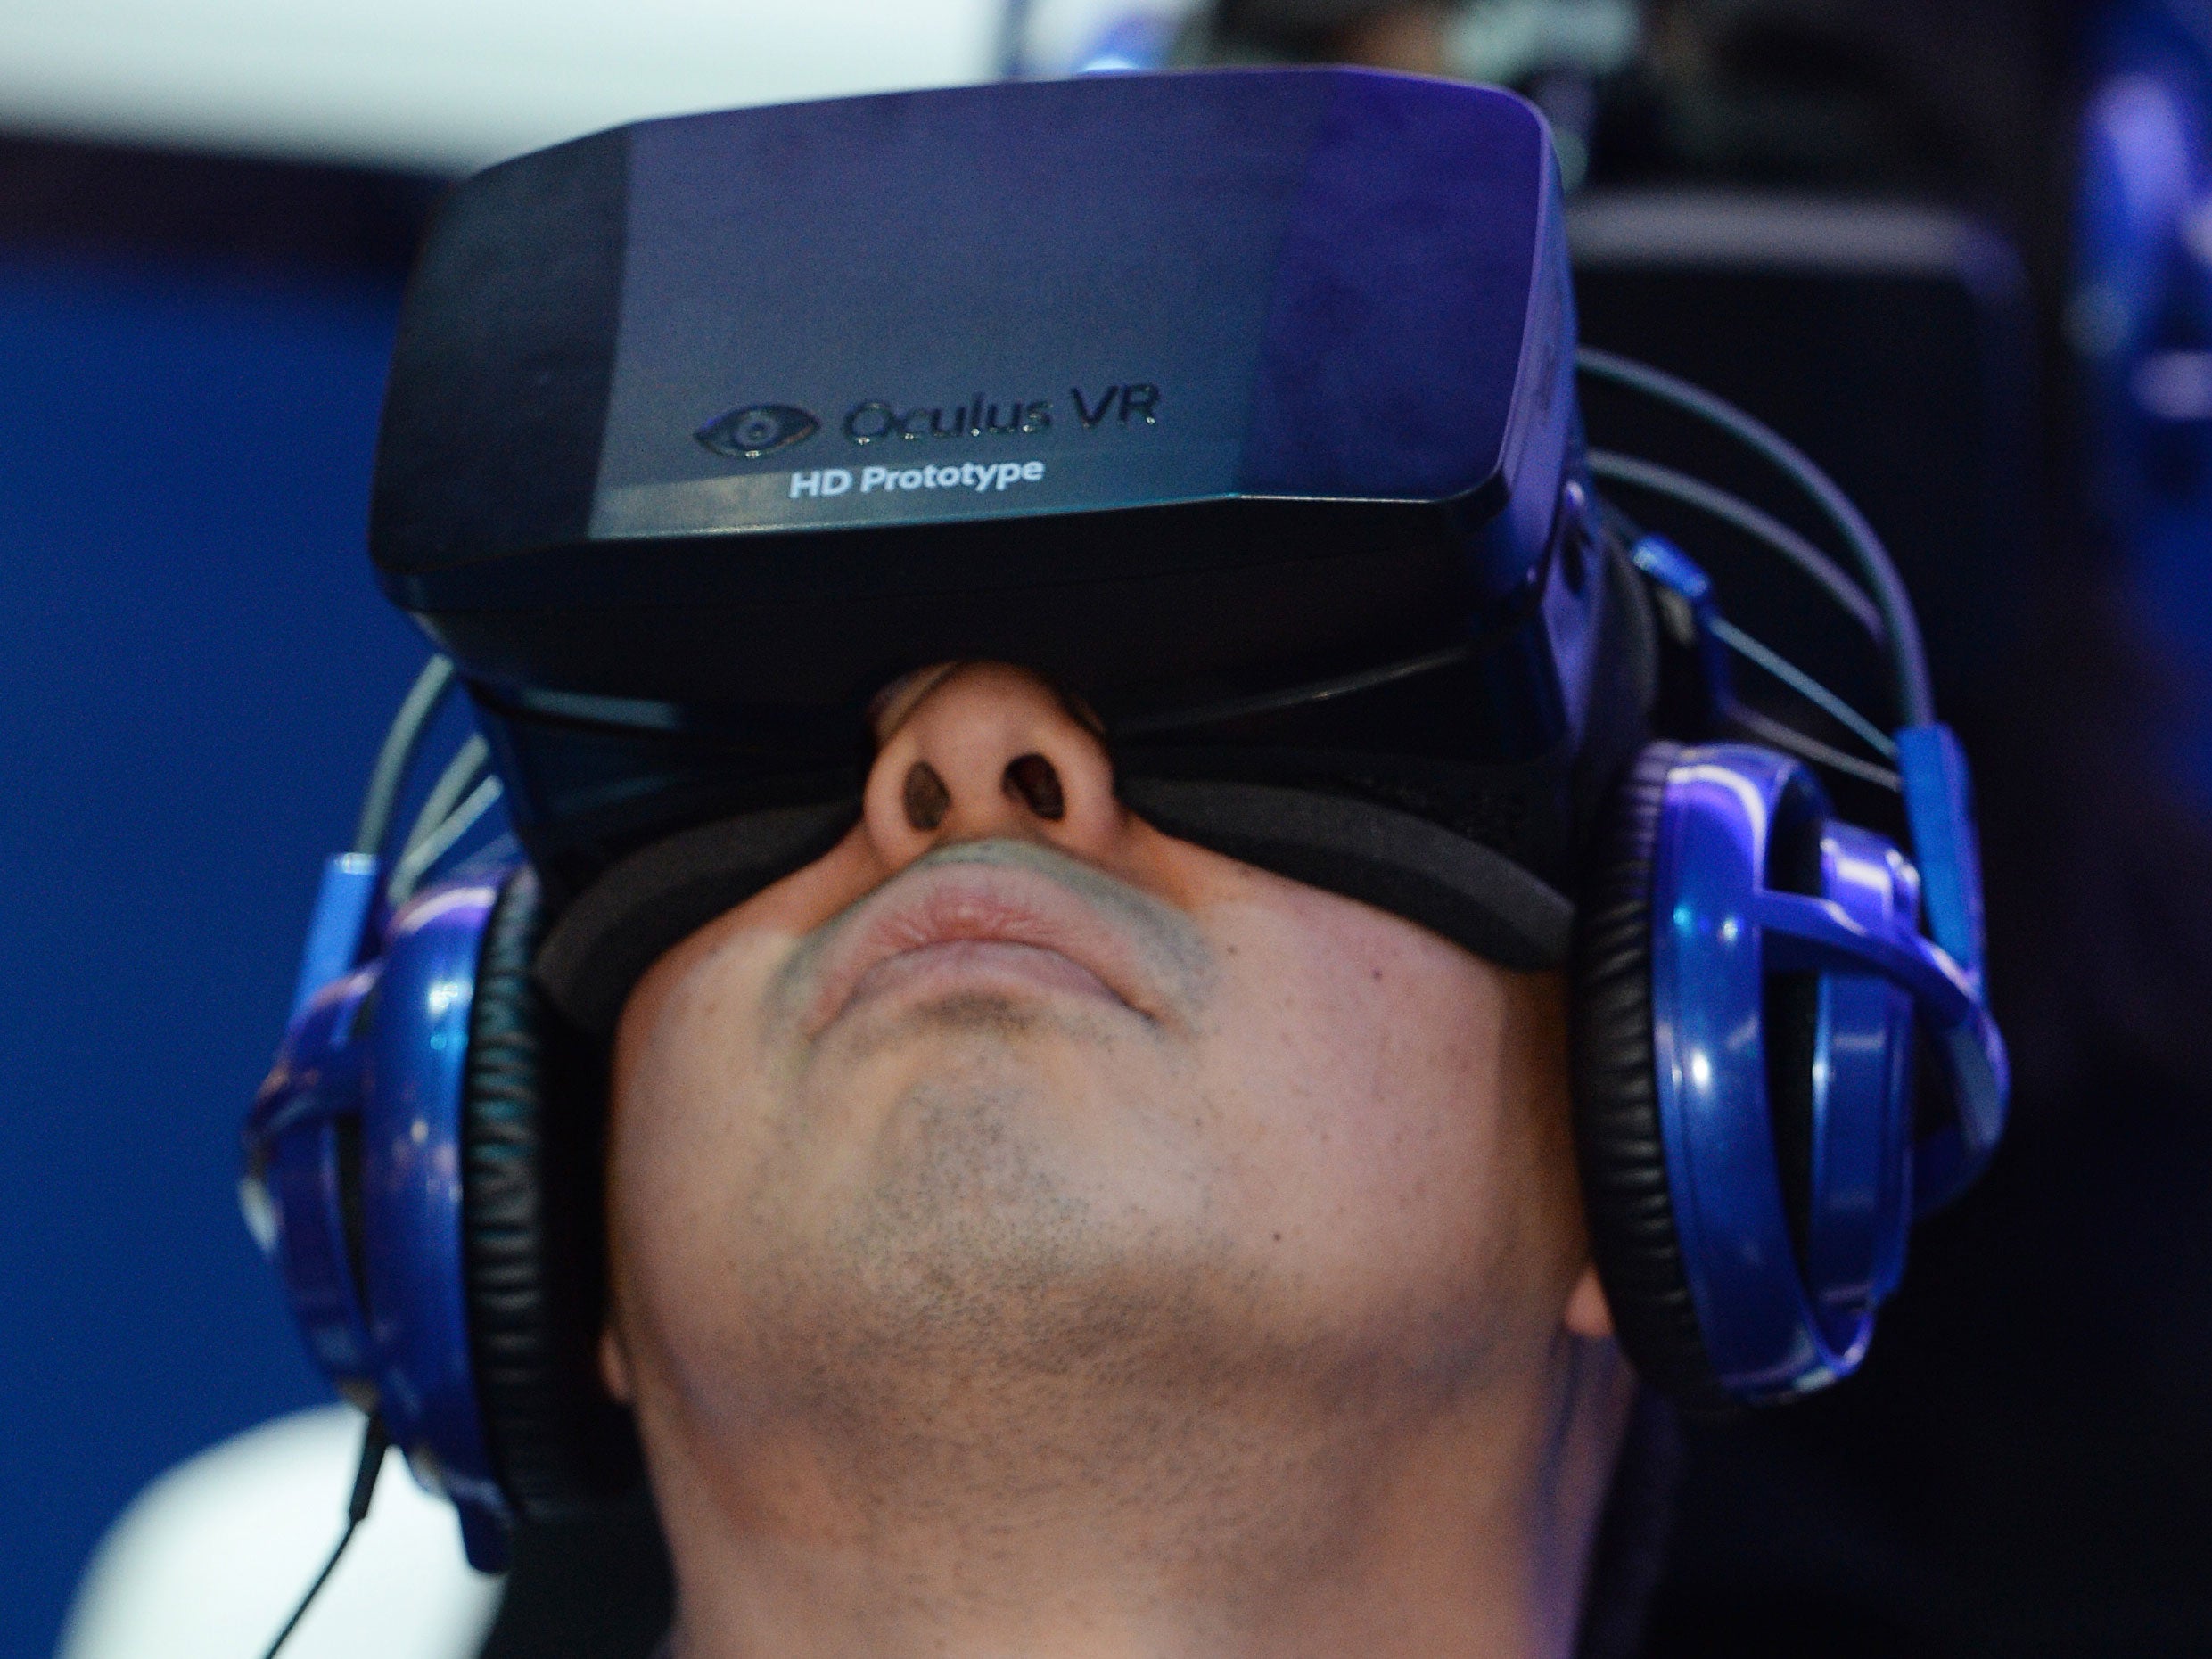 Virtual reality headsets: How Oculus Rift has started a games revolution, Virtual reality